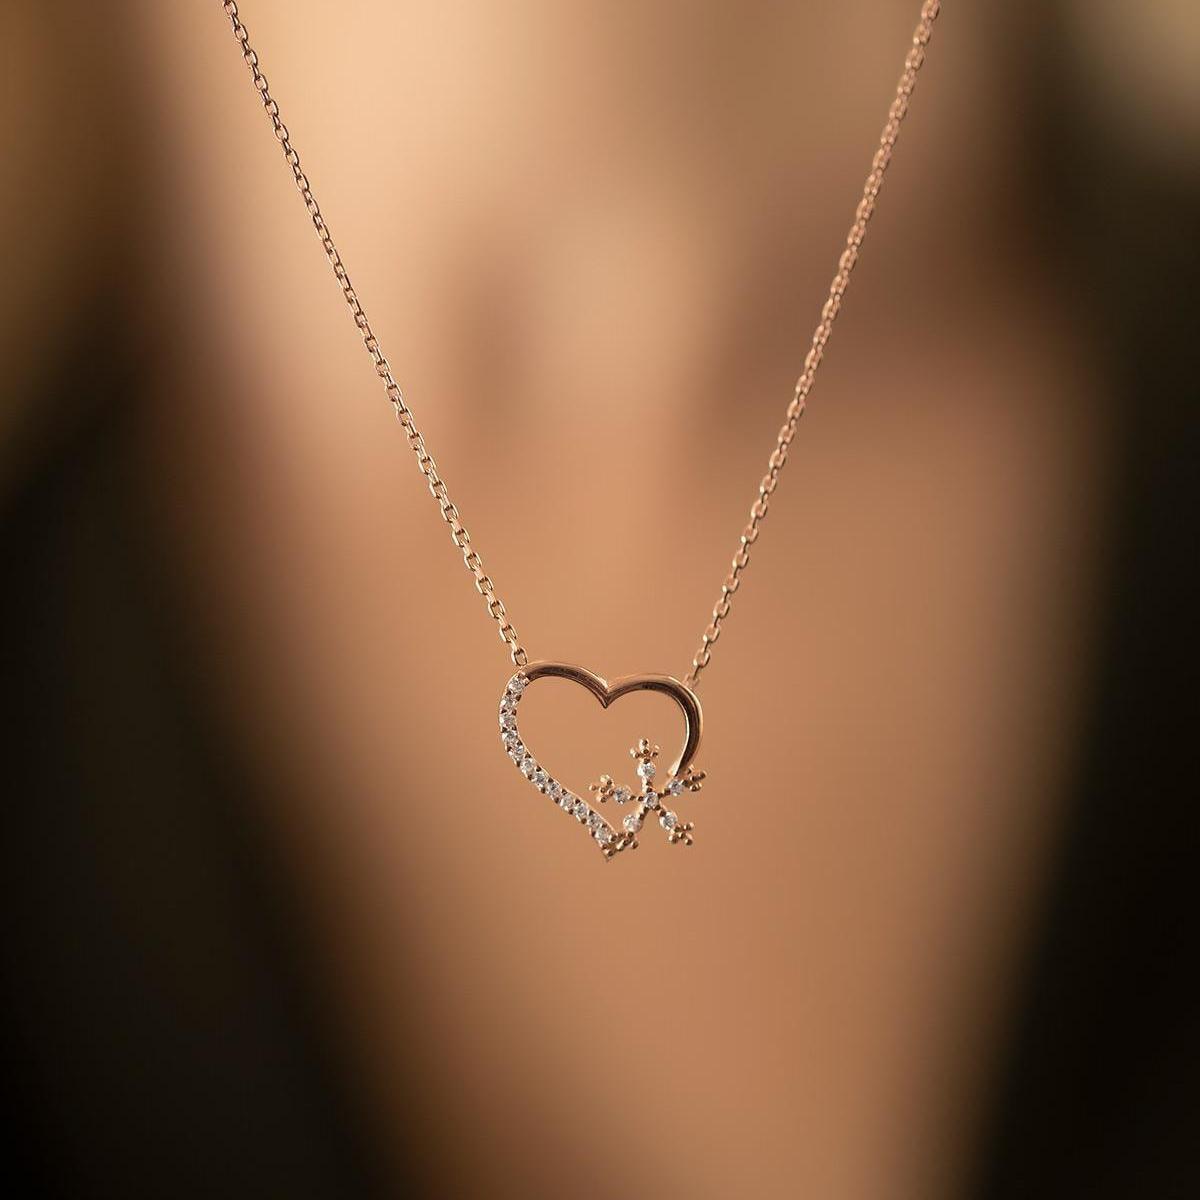 Heart Necklace Diamond • Snowflake Necklace Diamond • 925 Cz Necklace - Trending Silver Gifts